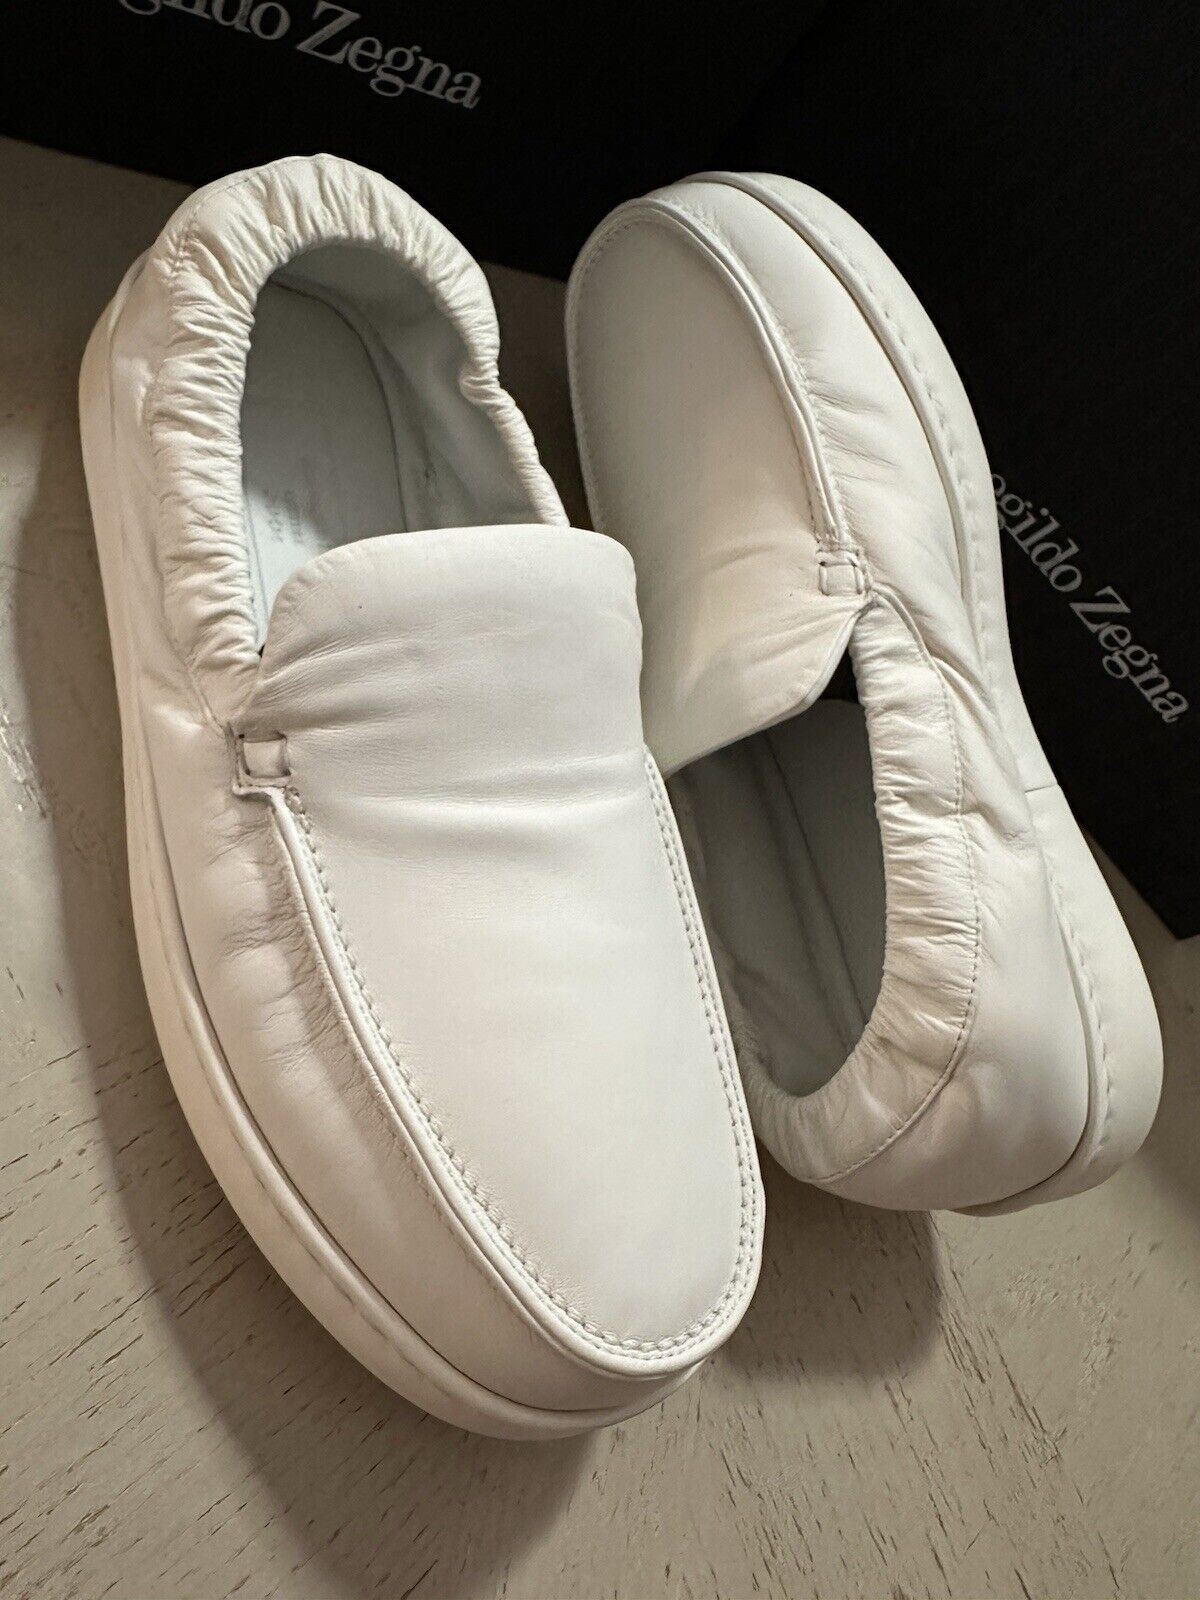 Ermenegildo Zegna Couture Leather Slippers Sneakers Shoes White 9 US New $860